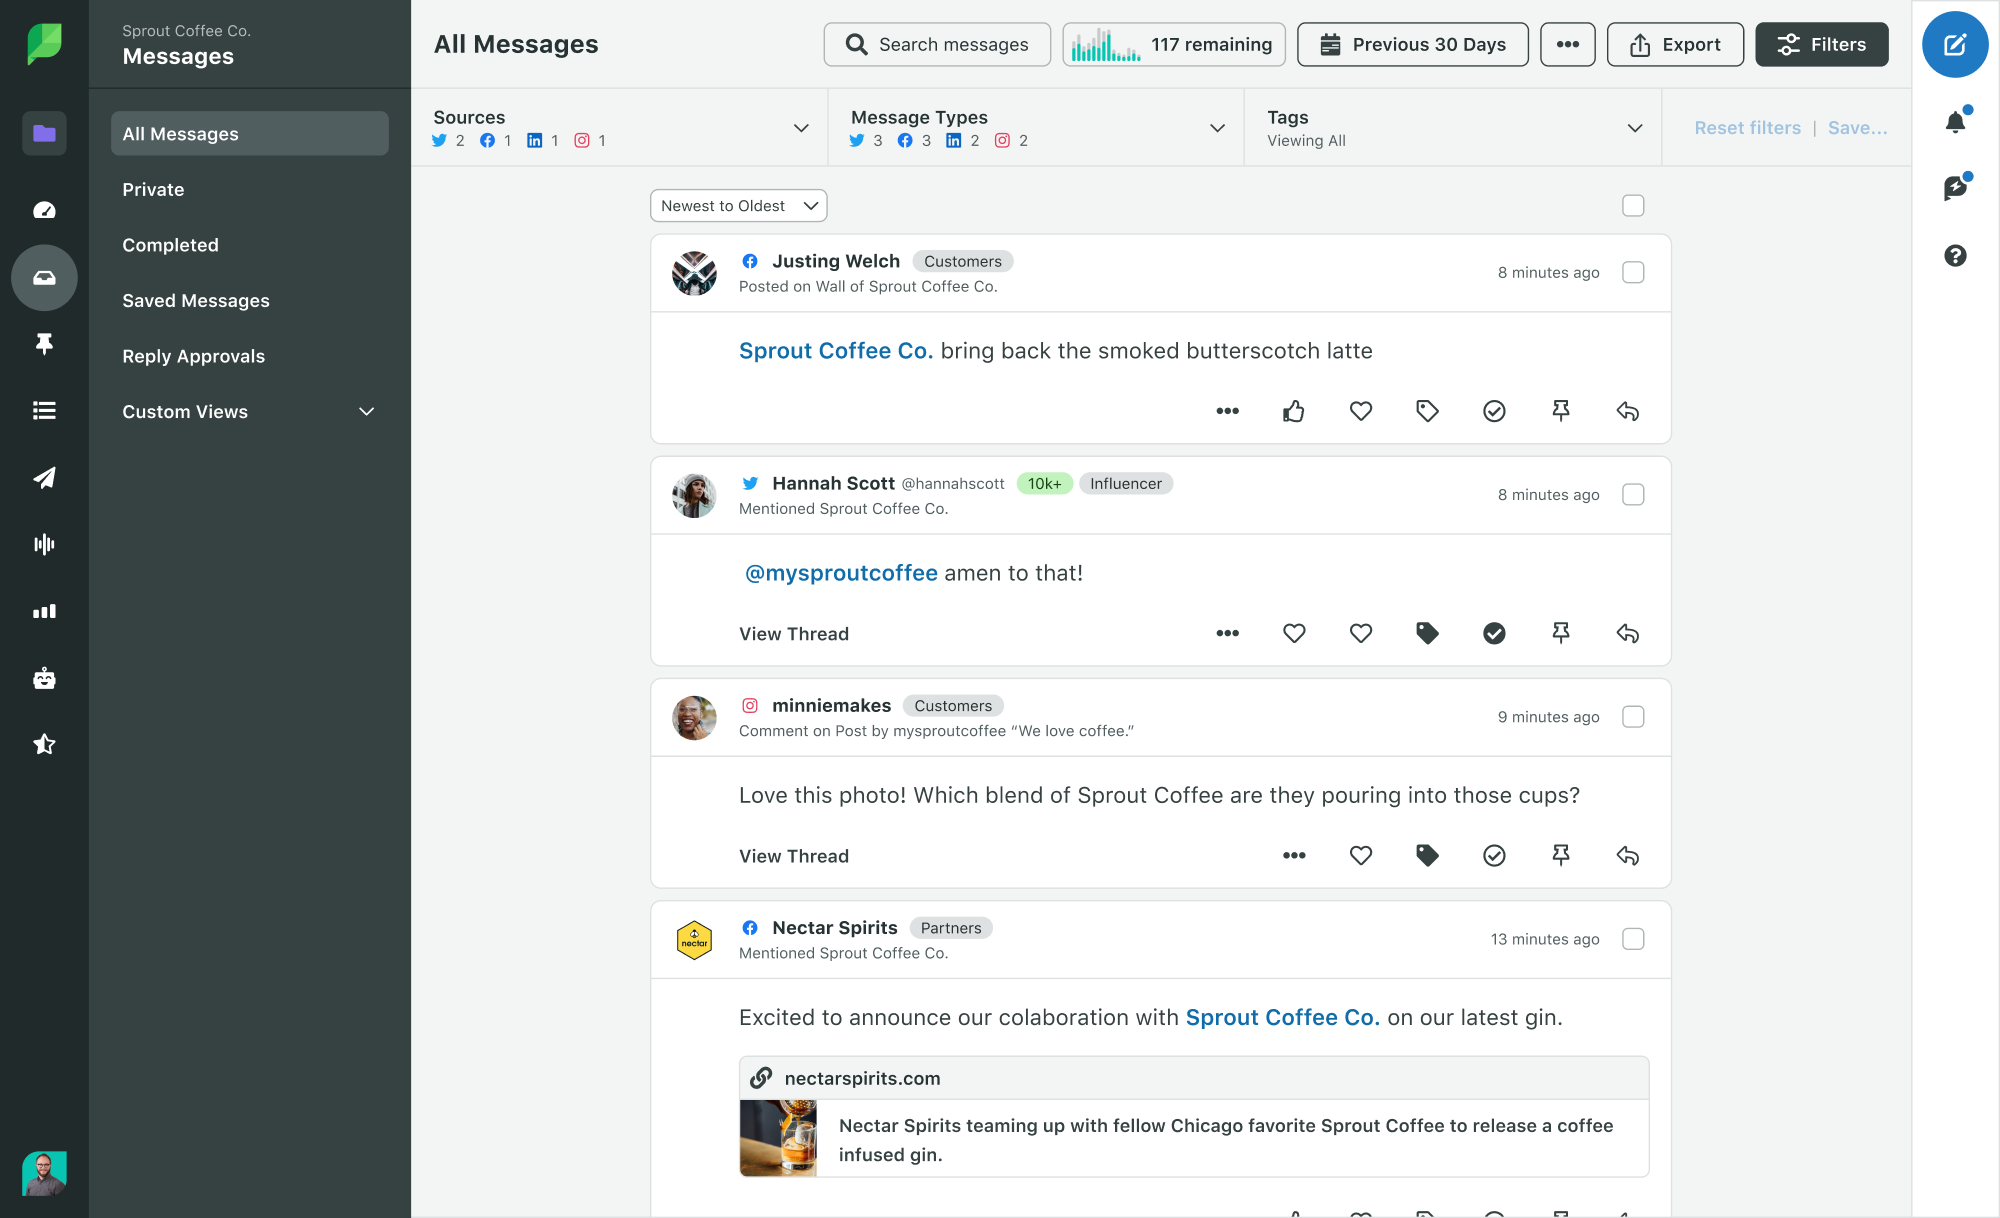 Optimize your engagement workflow with Sprout’s Inbox Views, which enable you to build and save your own custom filter sets in the Smart Inbox.